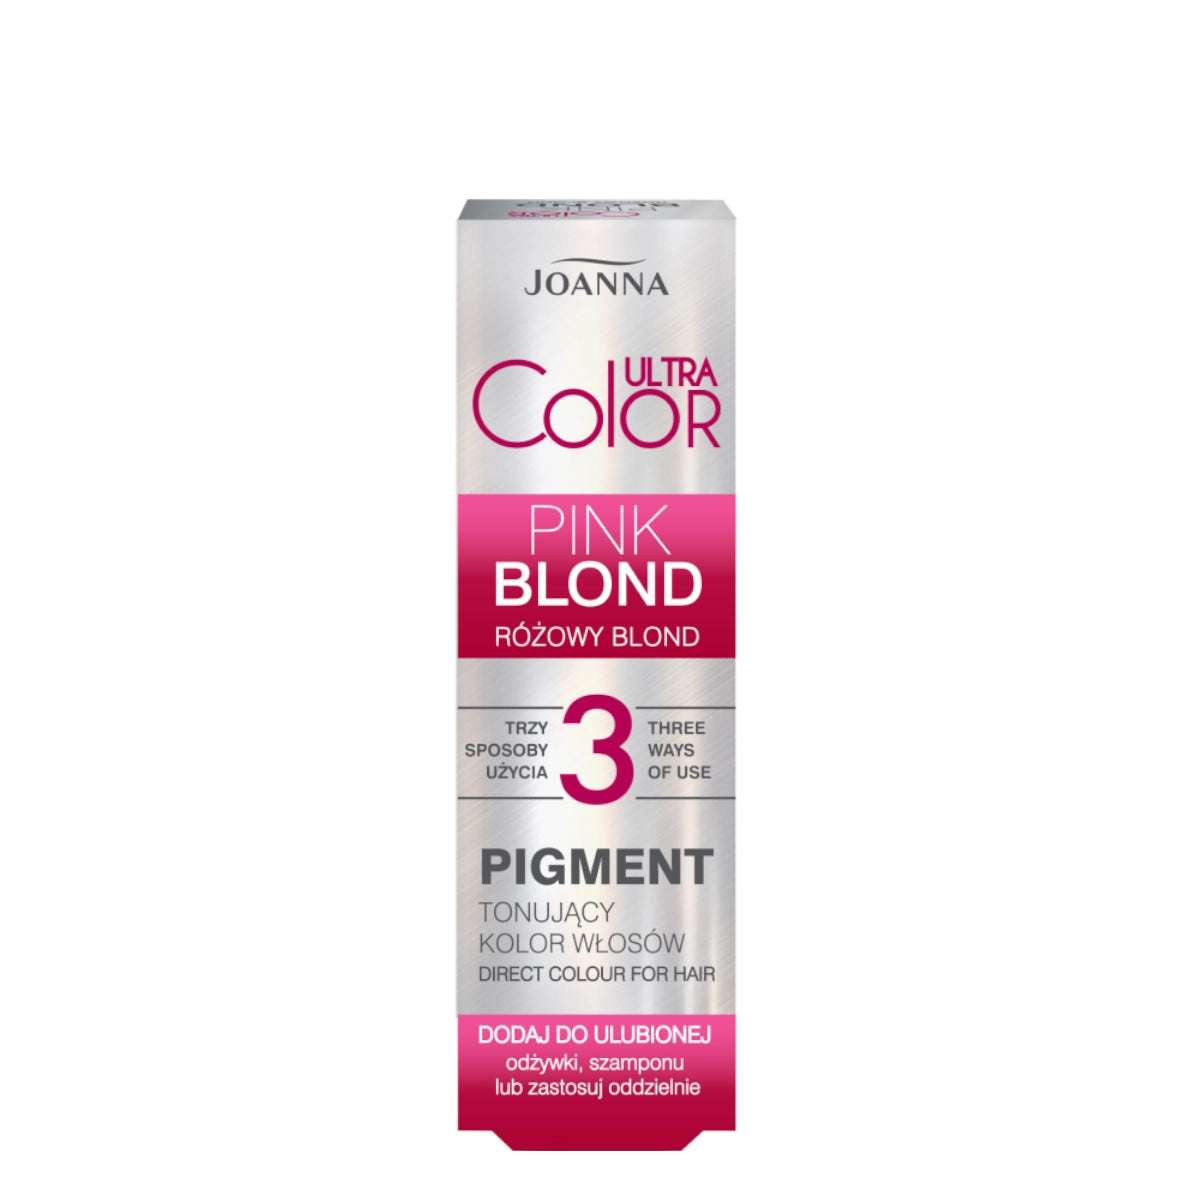 Joanna Ultra Color Pink Blond Hair Pigment 100ml